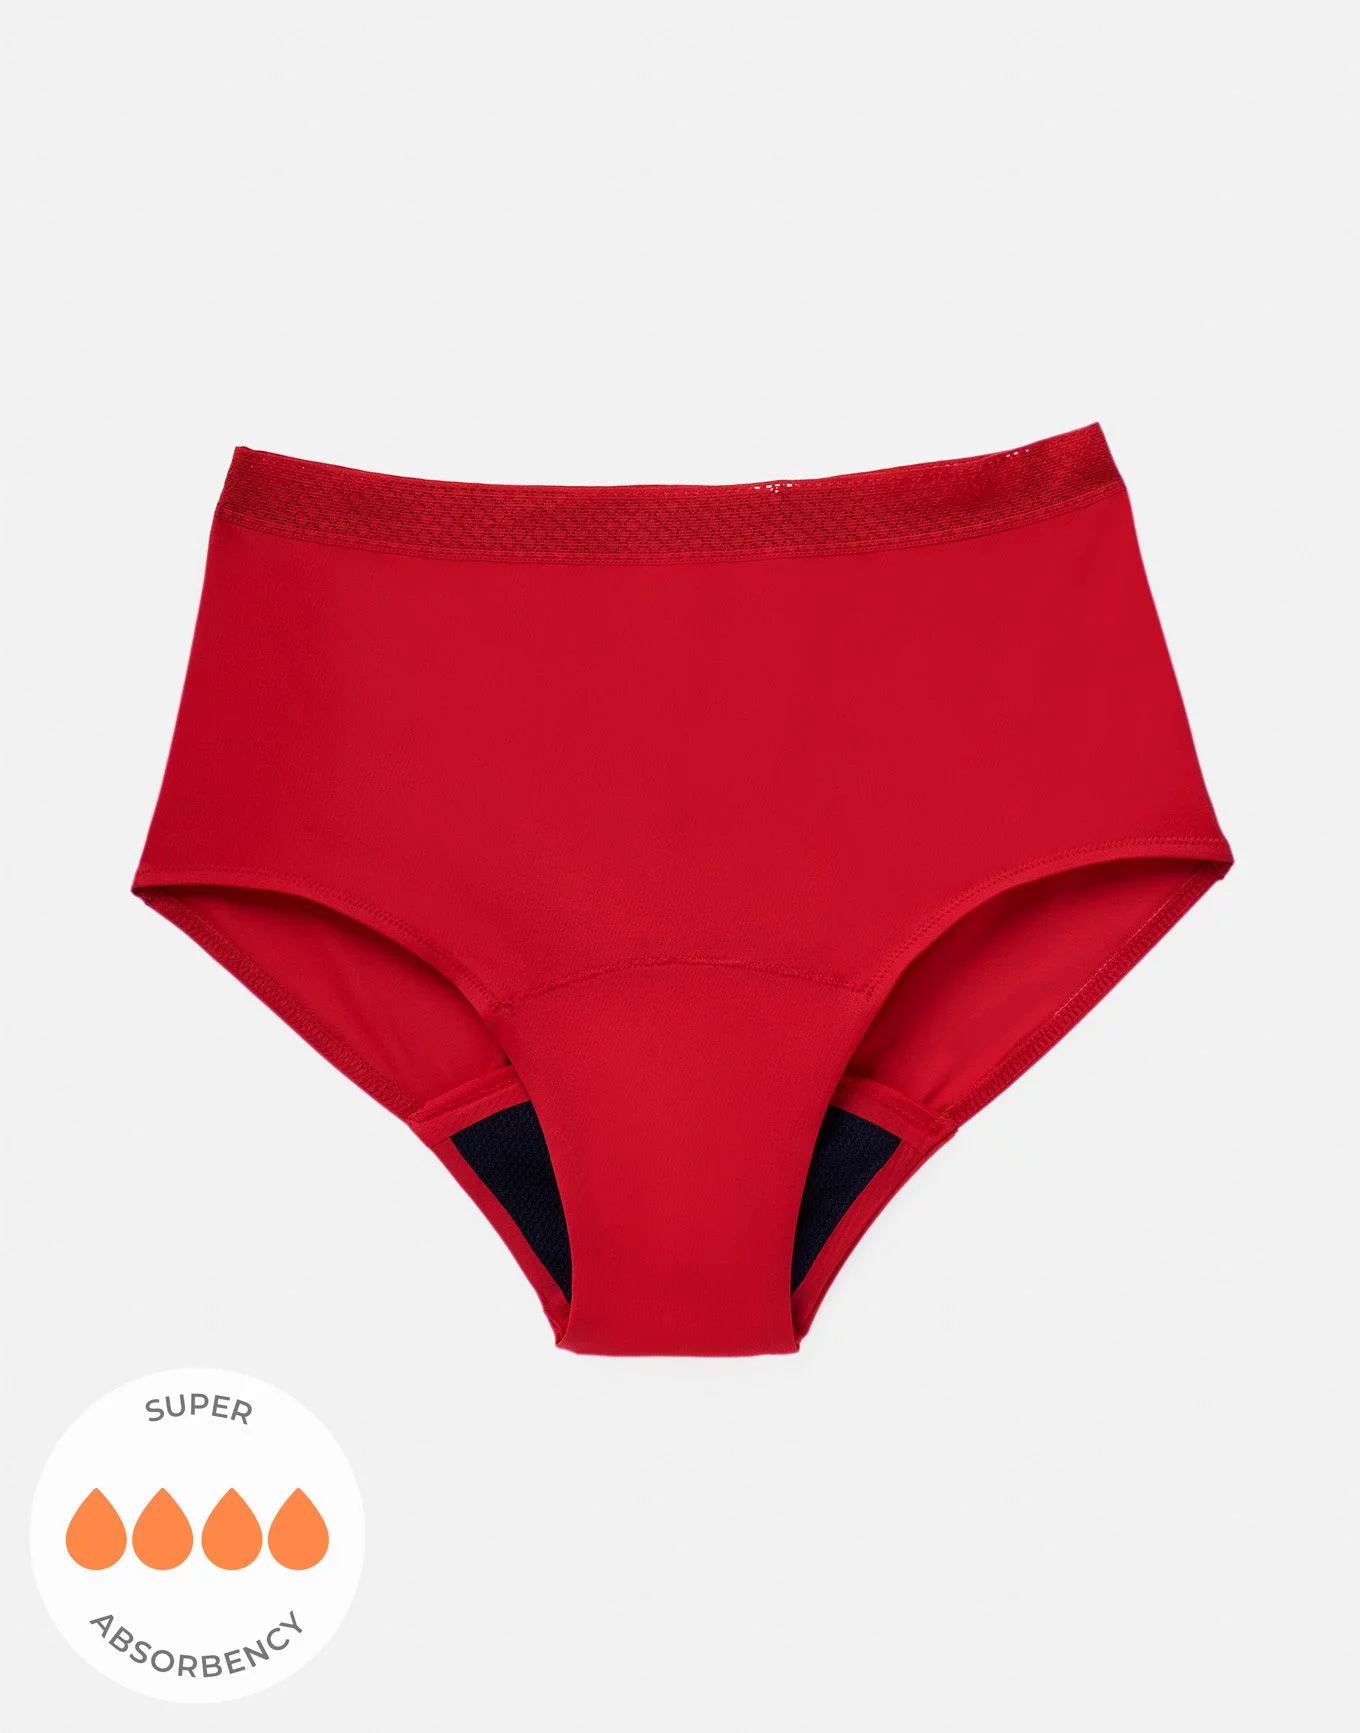 CODE RED Period Panties with Pocket- Red- L